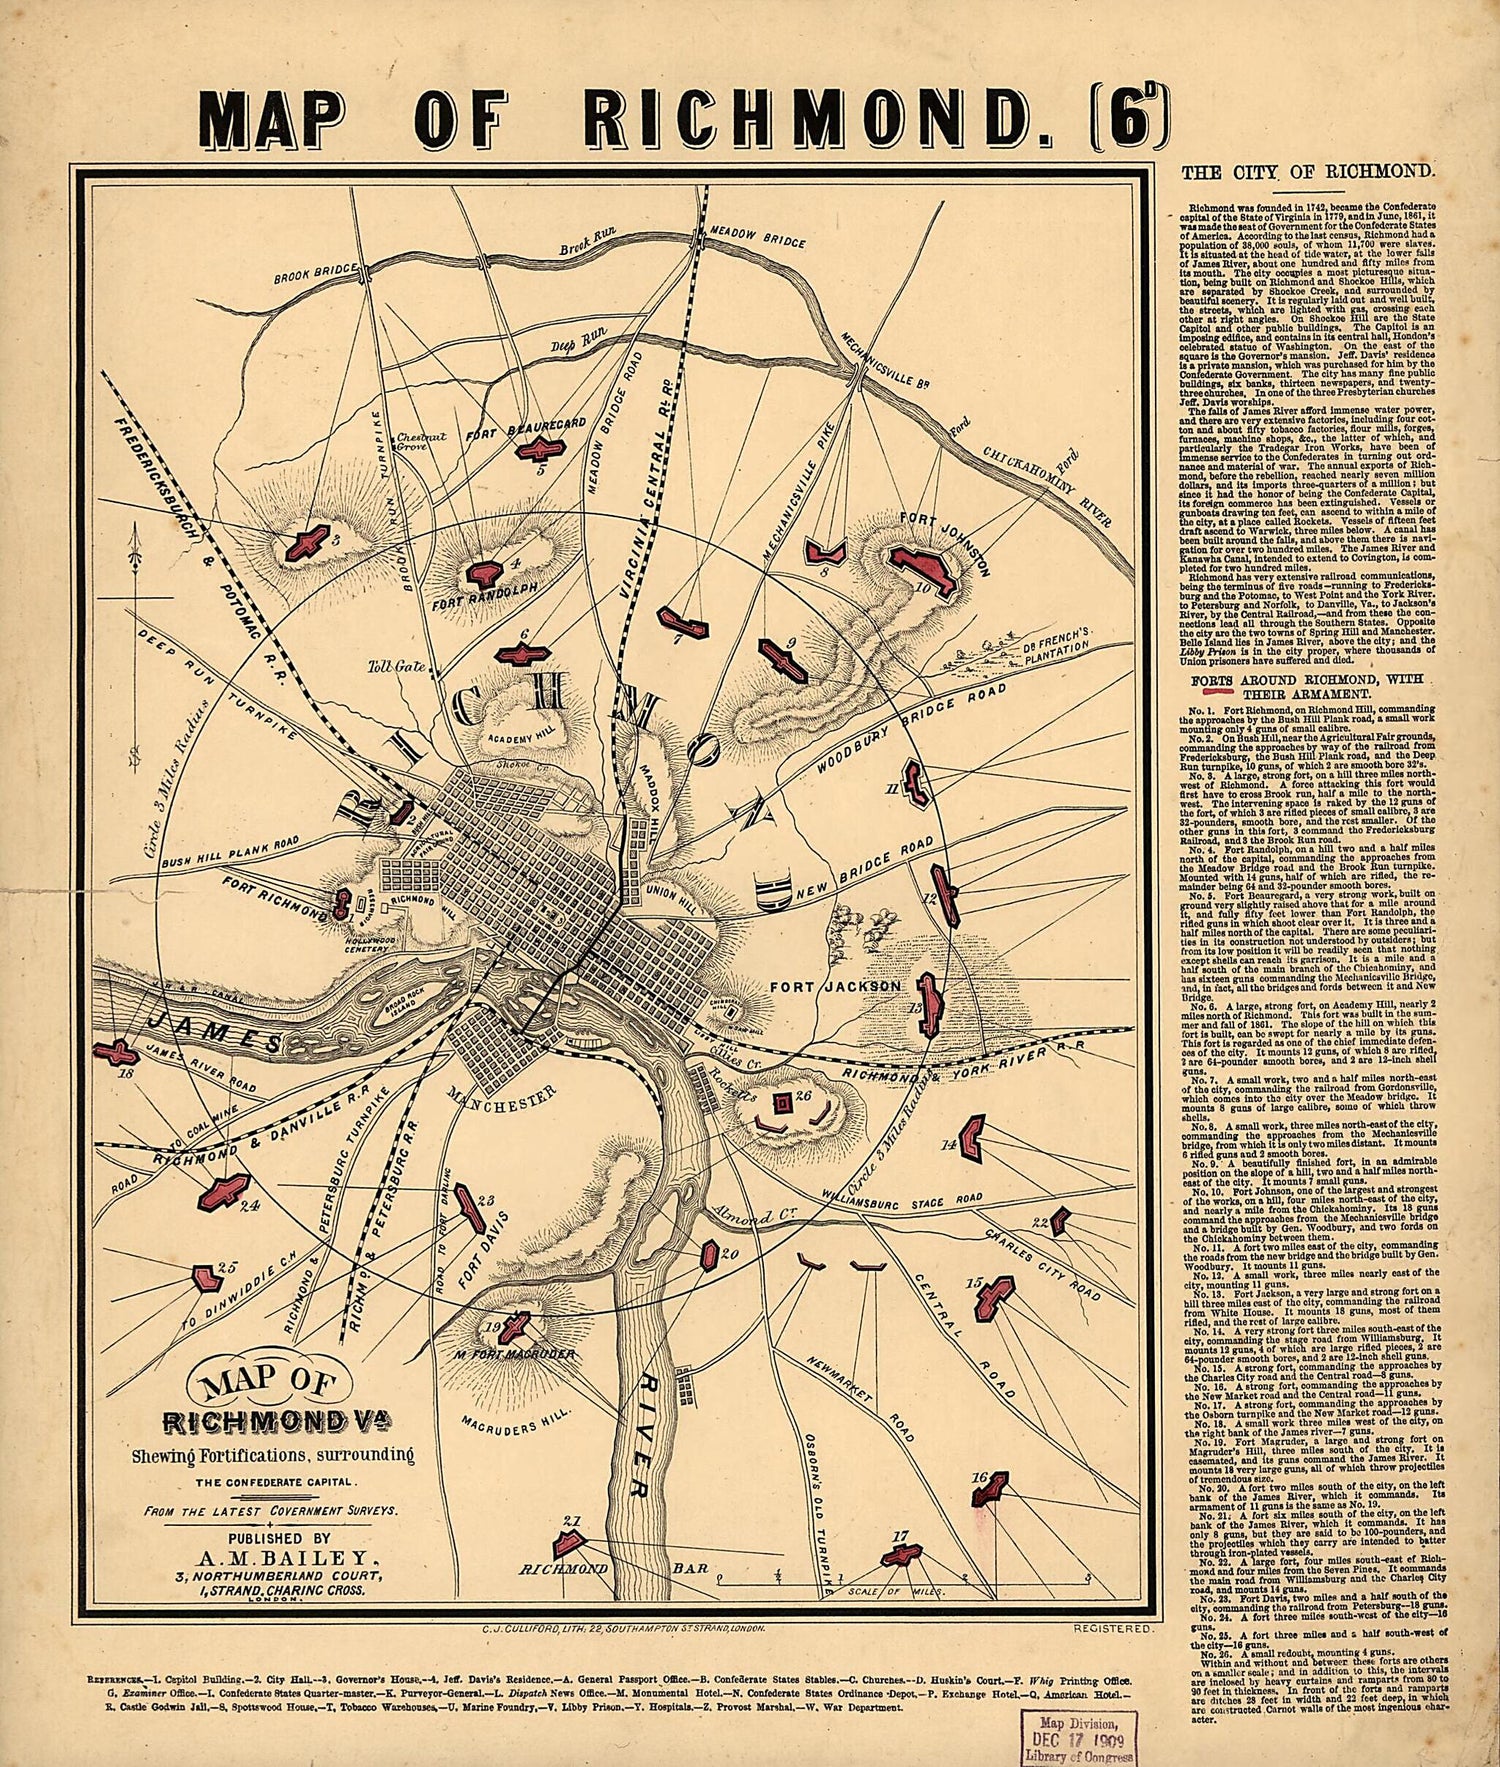 This old map of Map of Richmond, Va., Shewing Fortifications Surrounding the Confederate Capital. from the Latest Government Surveys from 1860 was created by A. M. Bailey in 1860